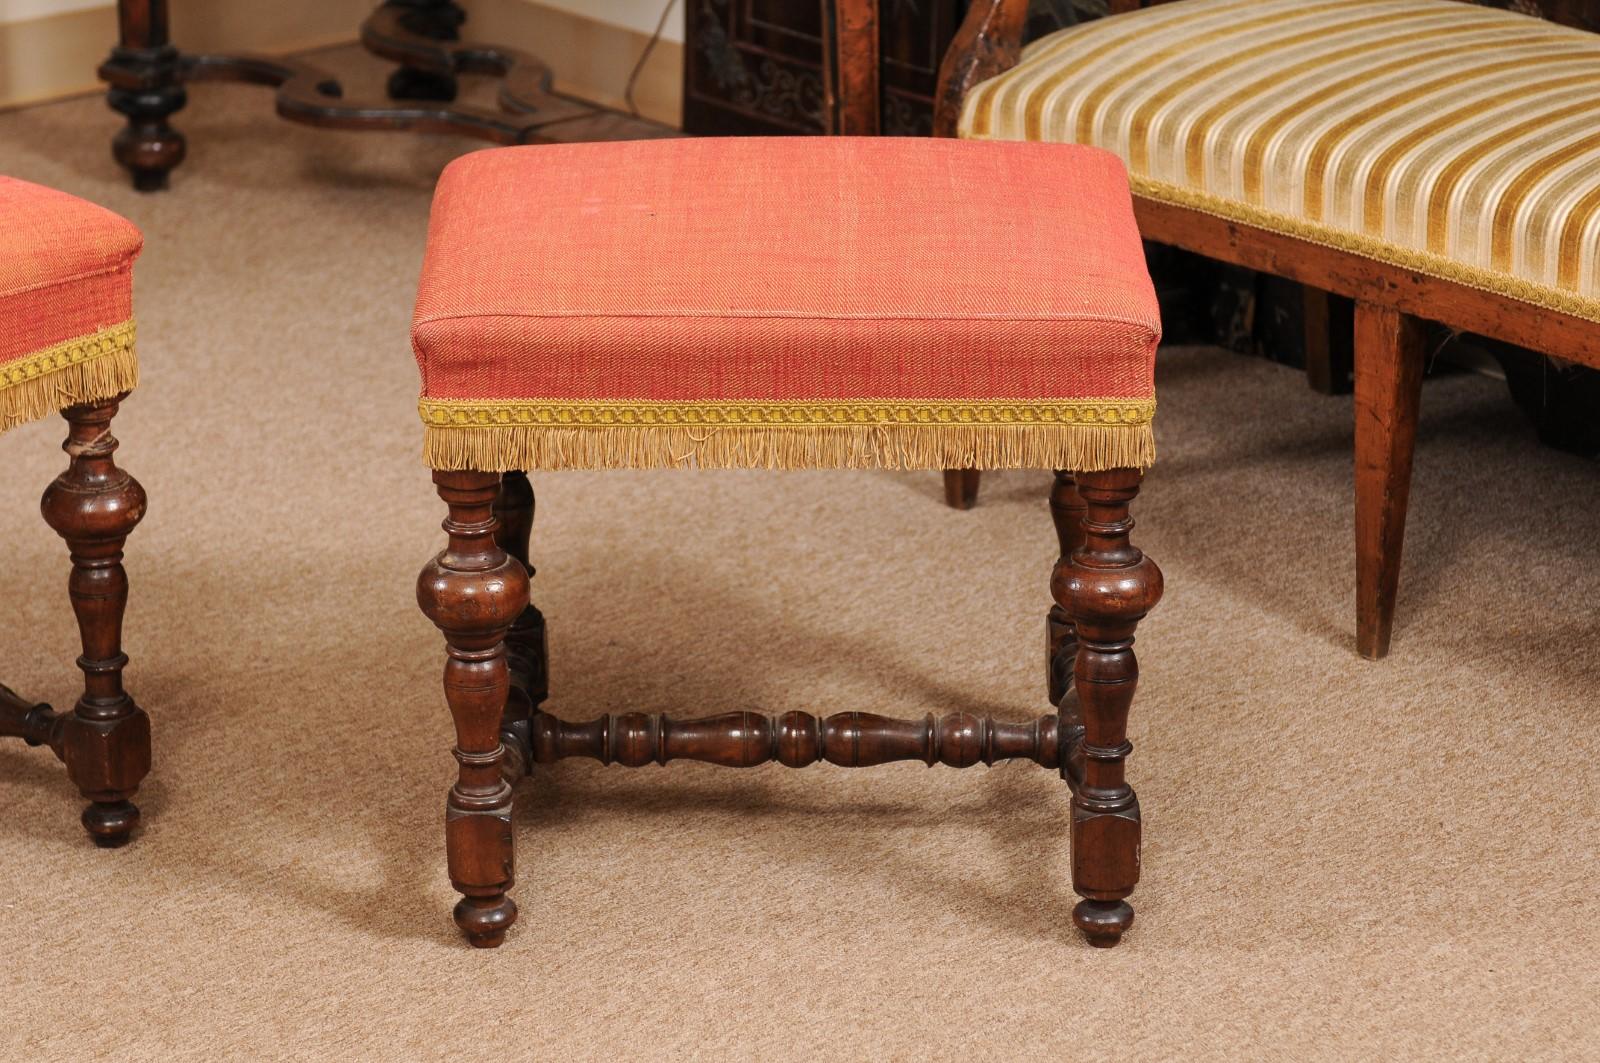 Upholstery Pair of 18th Century Baroque Style Italian Walnut Benches